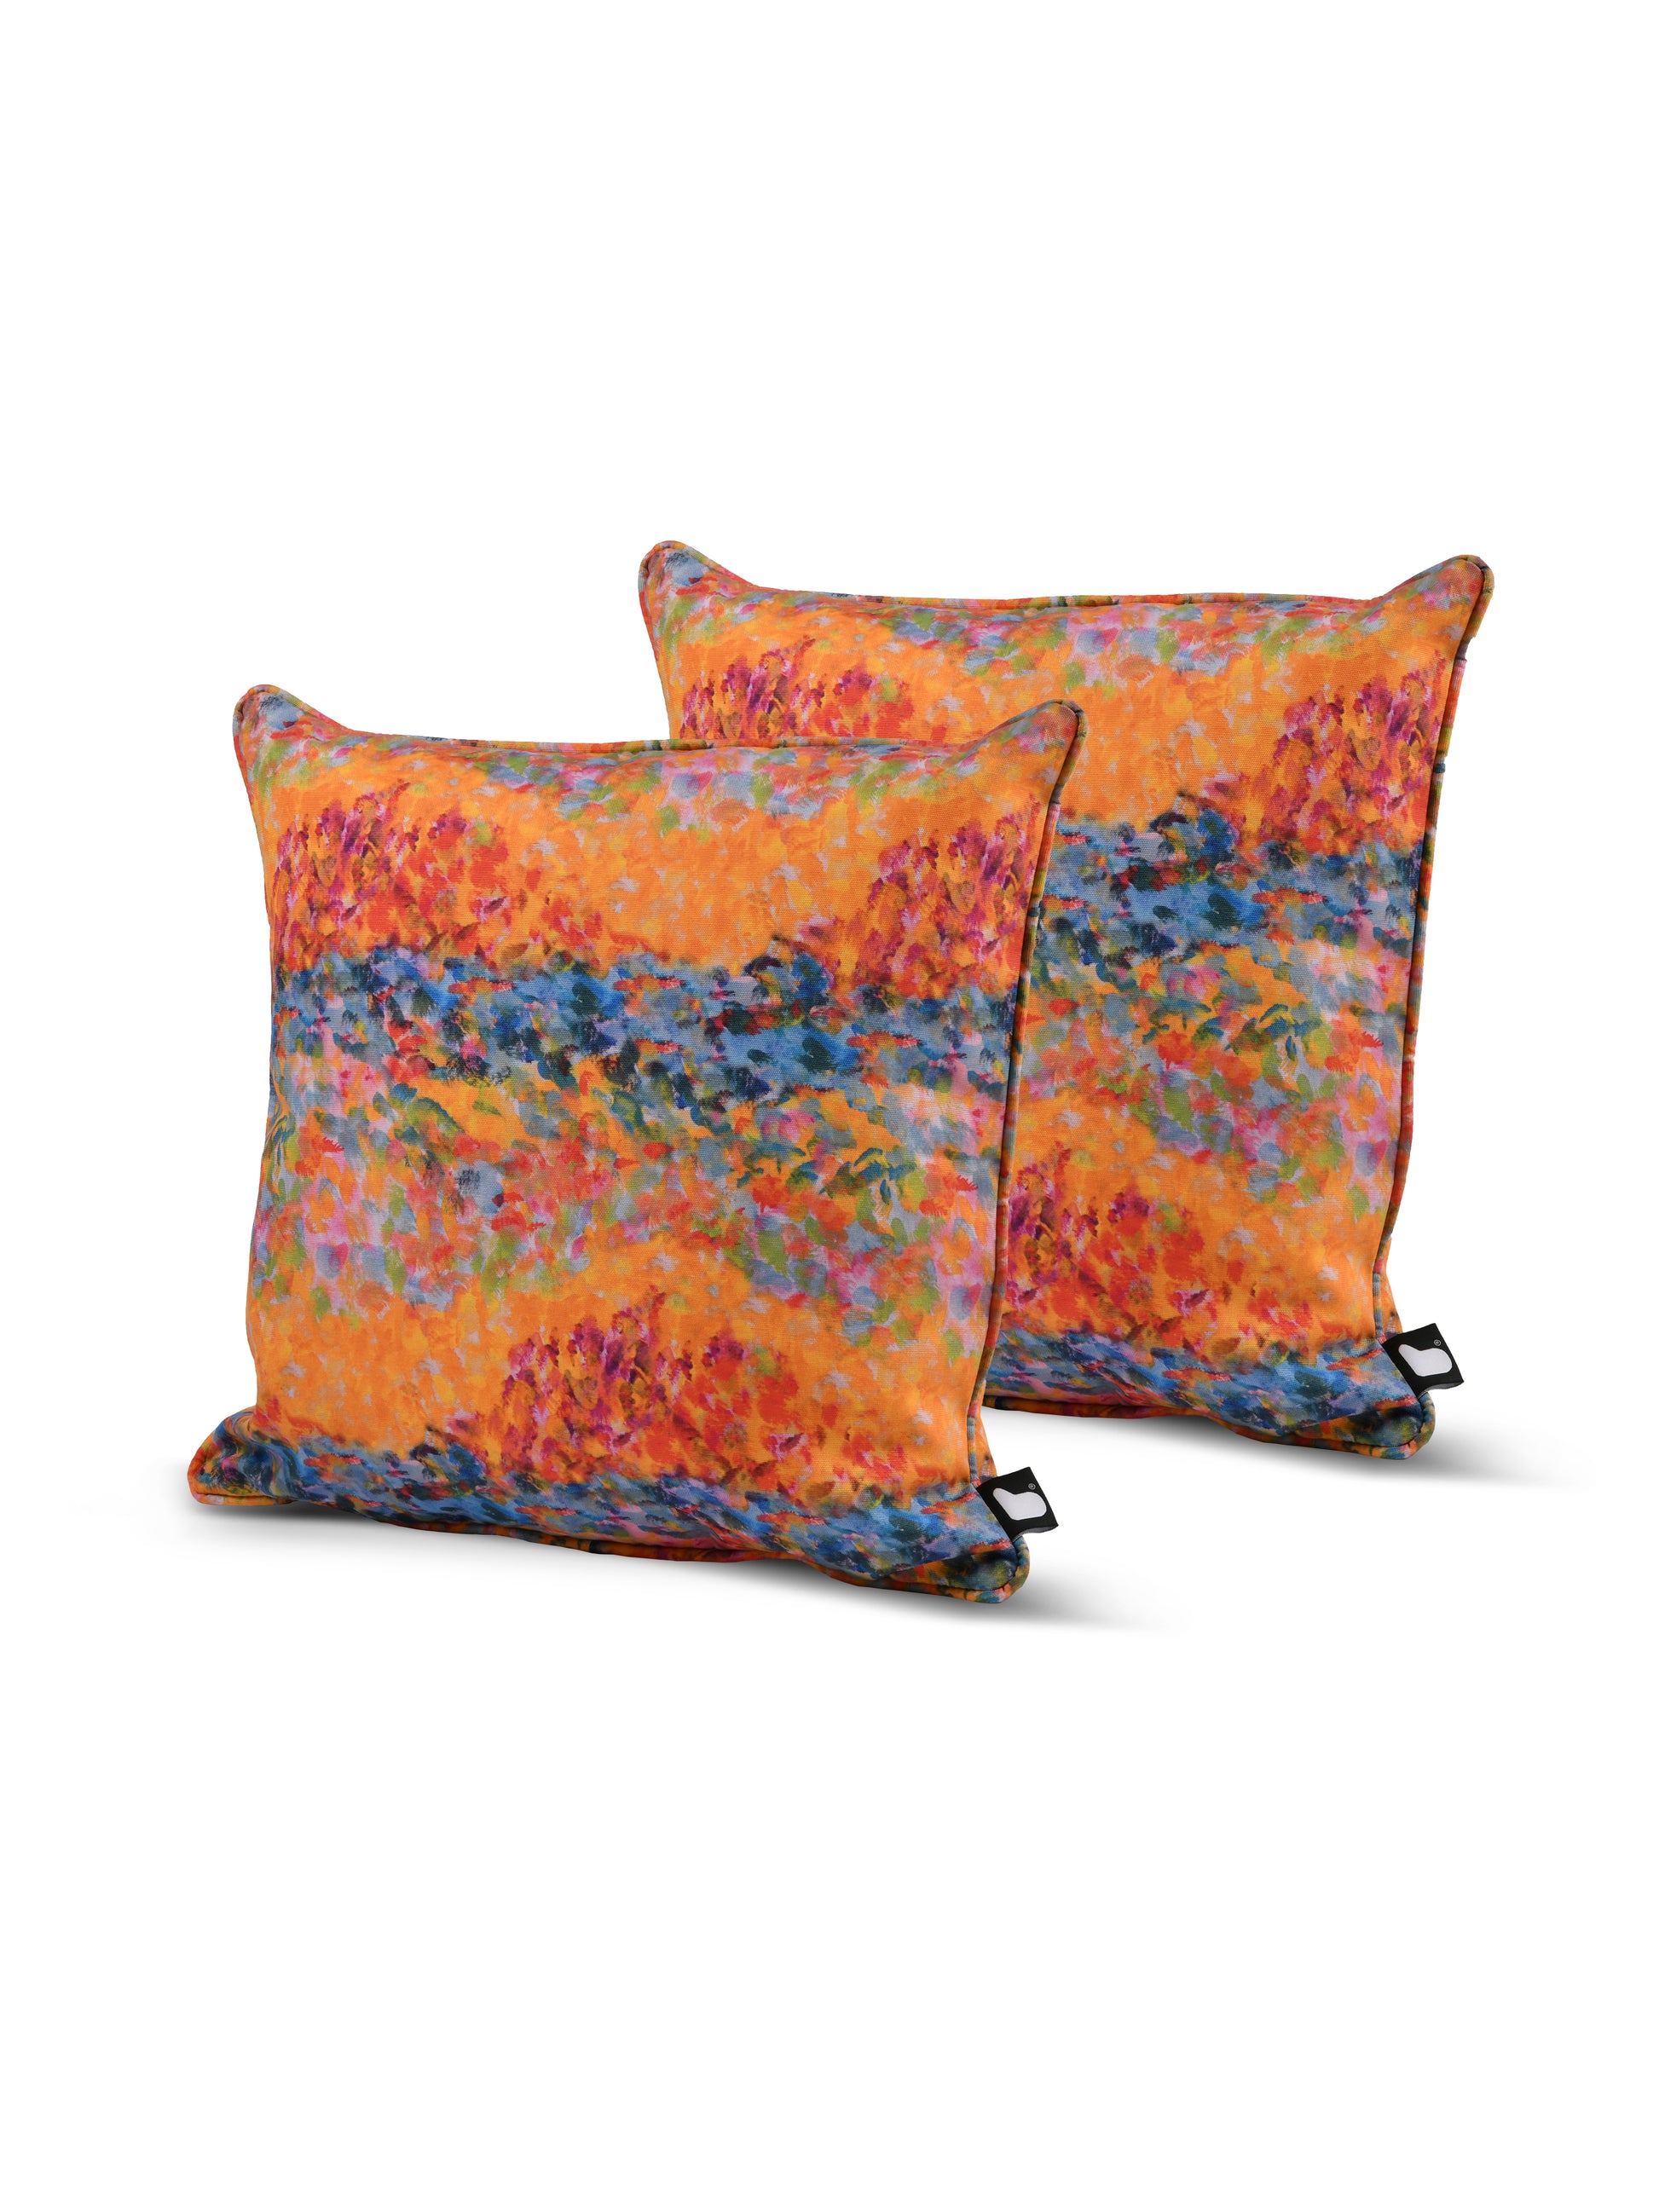 Two square B Cushion Twin Pack Art Collection by Brisks feature a vibrant, abstract design with splashes of orange, blue, and pink. The pattern evokes a painterly style, reminiscent of an impressionistic landscape or sunset. Made with UV resistant and splash-proof fabric, the pillows boast a tag on one corner.